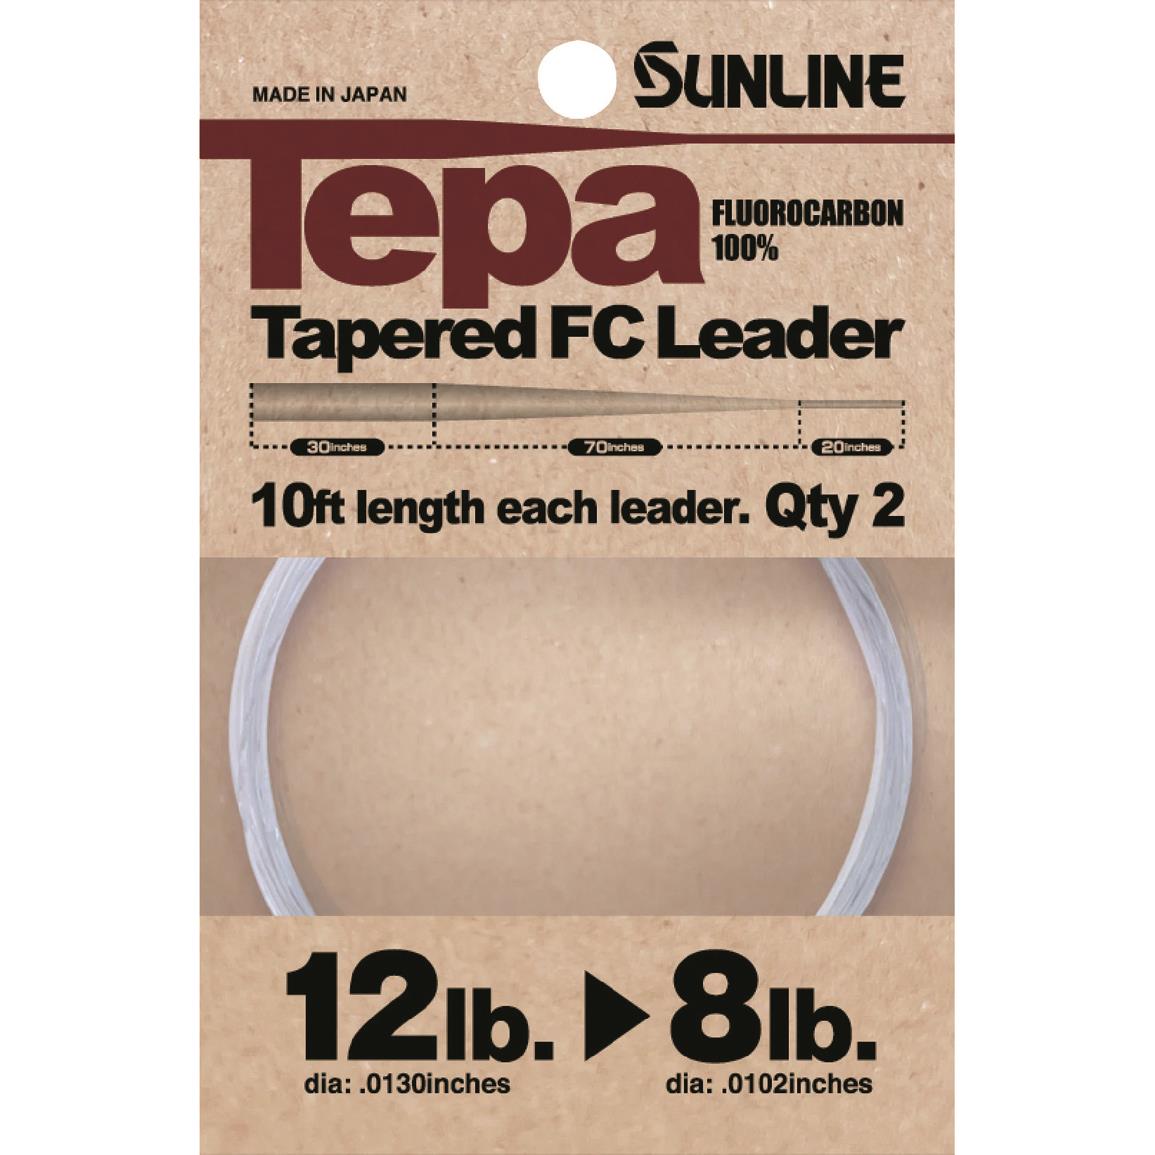 Sunline Tepa Tapered Fluorcarbon Leaders, 2 Pack - 737591, Fishing